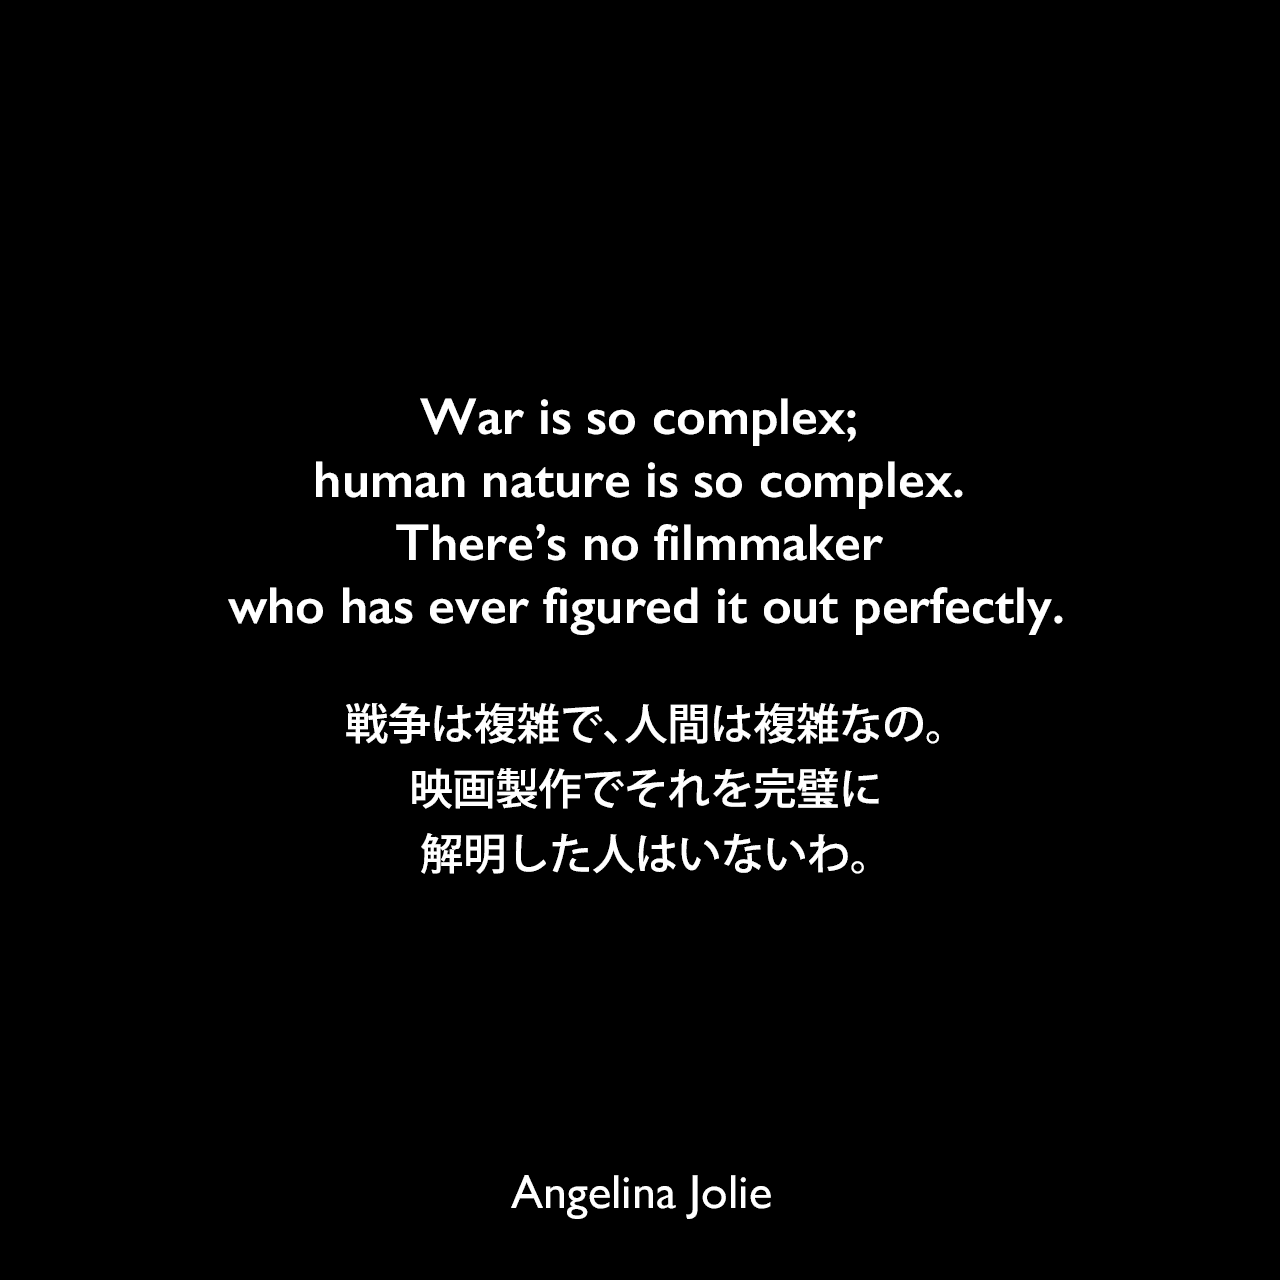 War is so complex; human nature is so complex. There’s no filmmaker who has ever figured it out perfectly.戦争は複雑で、人間は複雑なの。映画製作でそれを完璧に解明した人はいないわ。Angelina Jolie